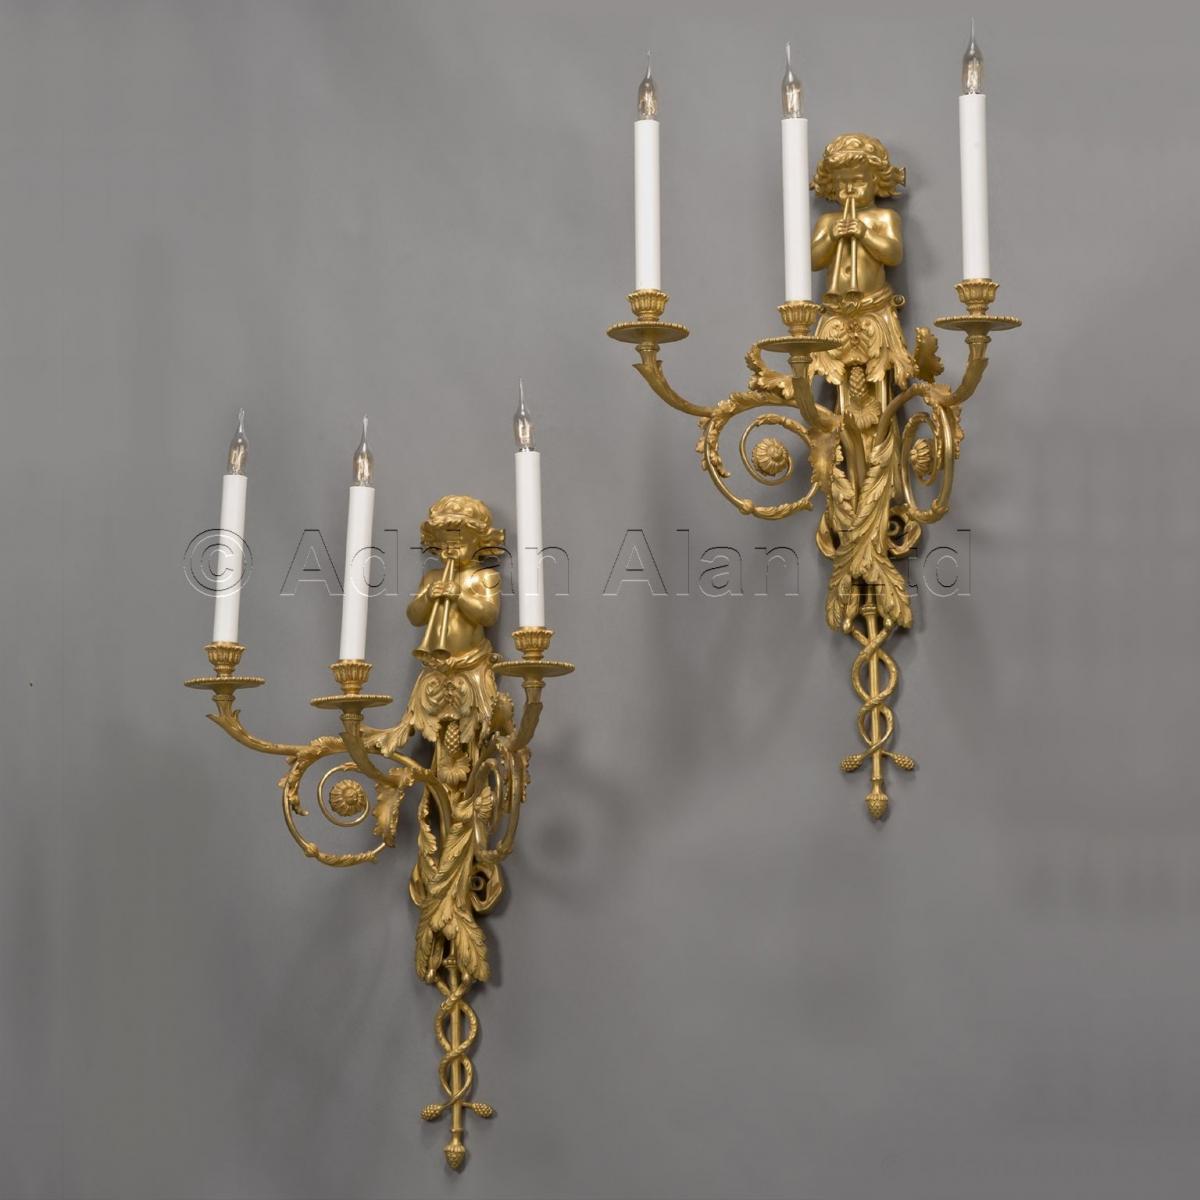 A Pair of  Louis XVI Style Three-Light Wall-Appliques After Jean Hauré ©AdrianAlanLtd